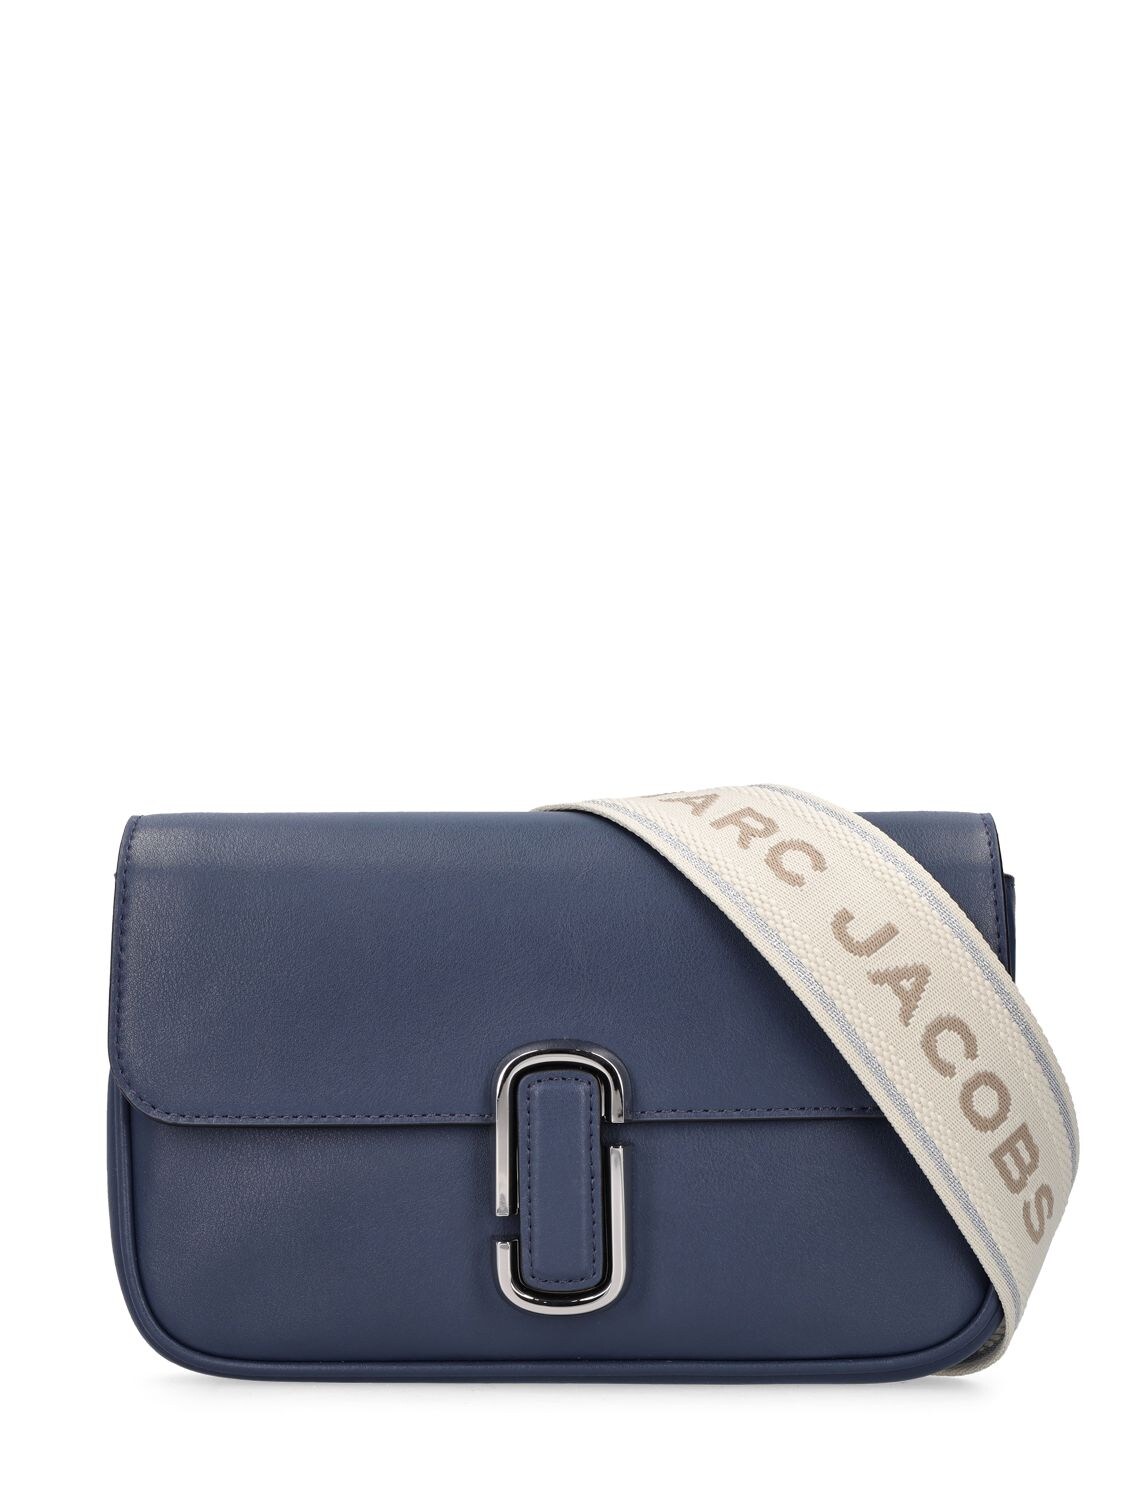 MARC JACOBS (THE) The Mini Soft Leather Shoulder Bag